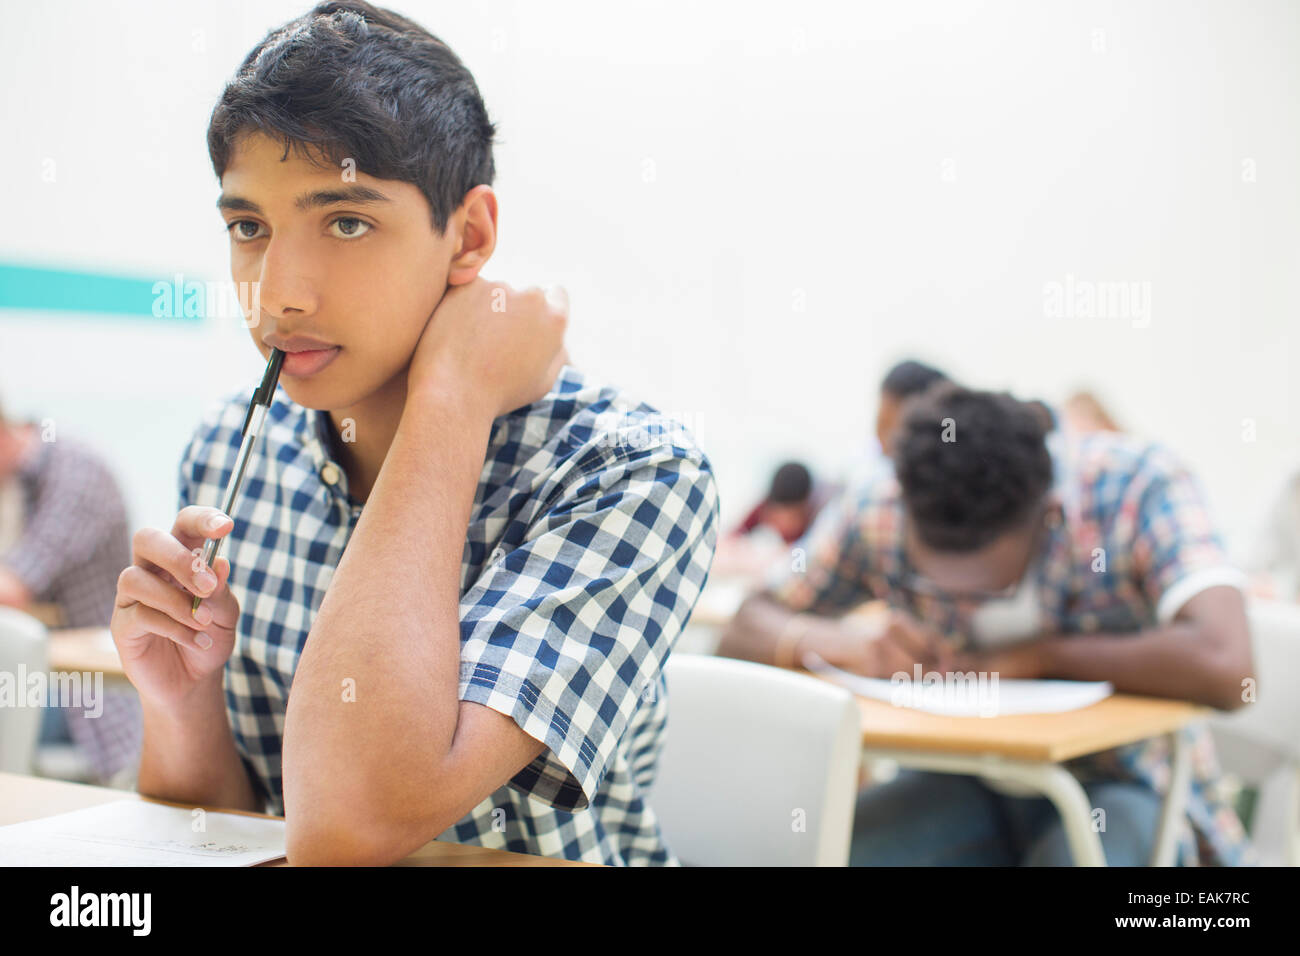 Portrait of pensive student during his GCSE examination Stock Photo